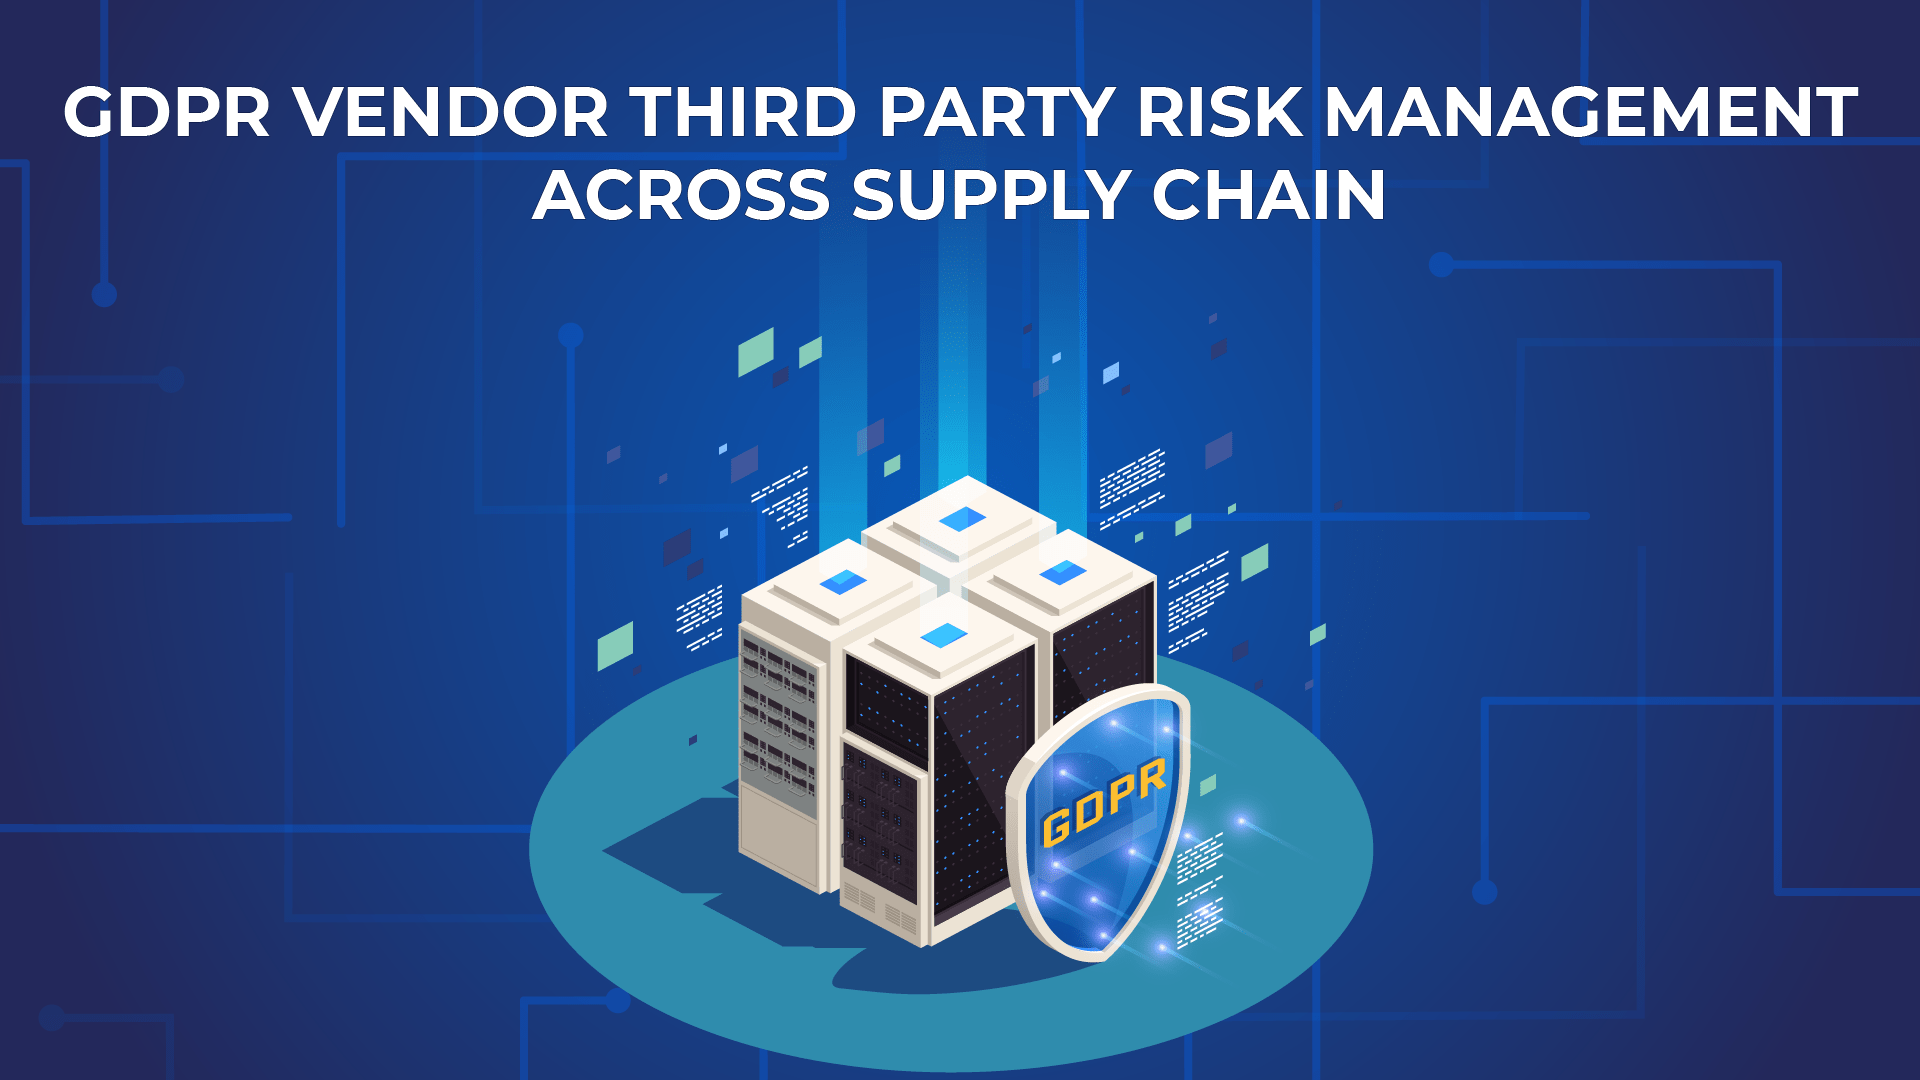 Managing GDPR Vendor Third Party Risk Management Across Supply Chain